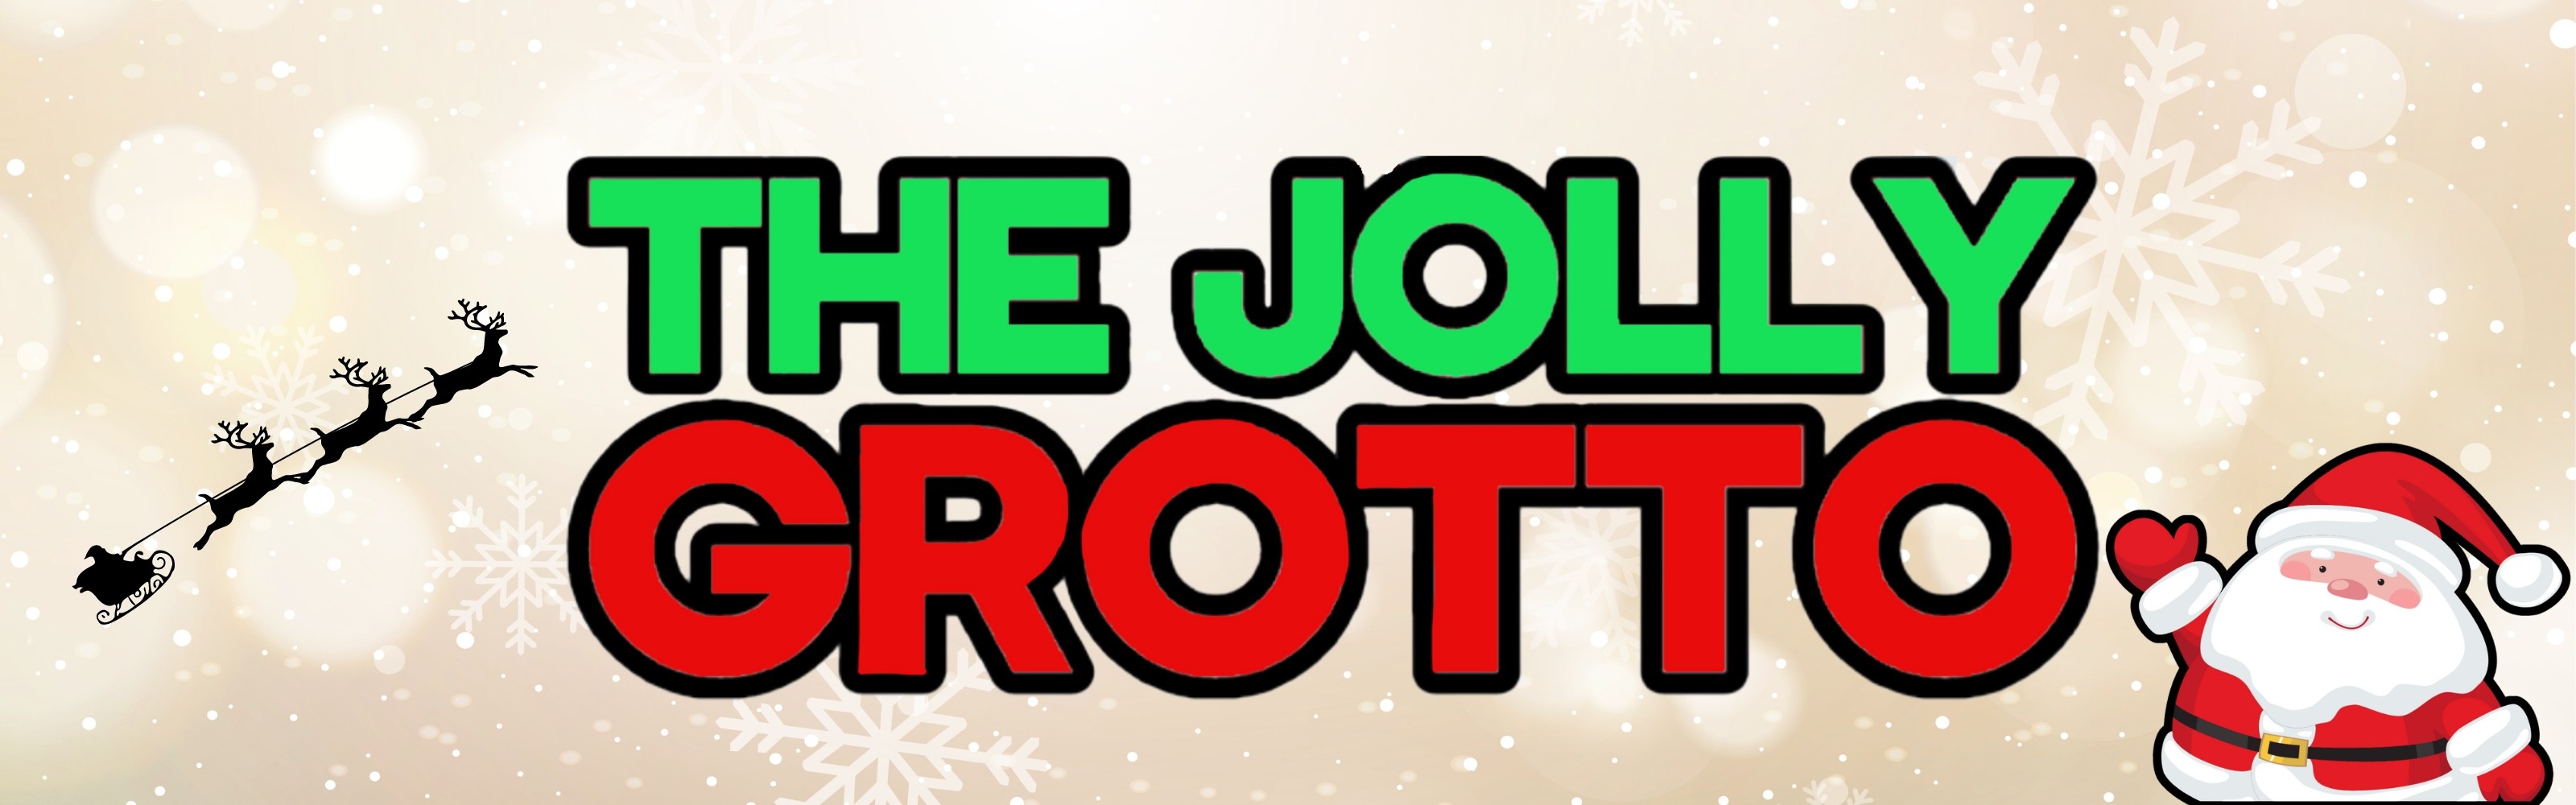 The Jolly Grotto Essex